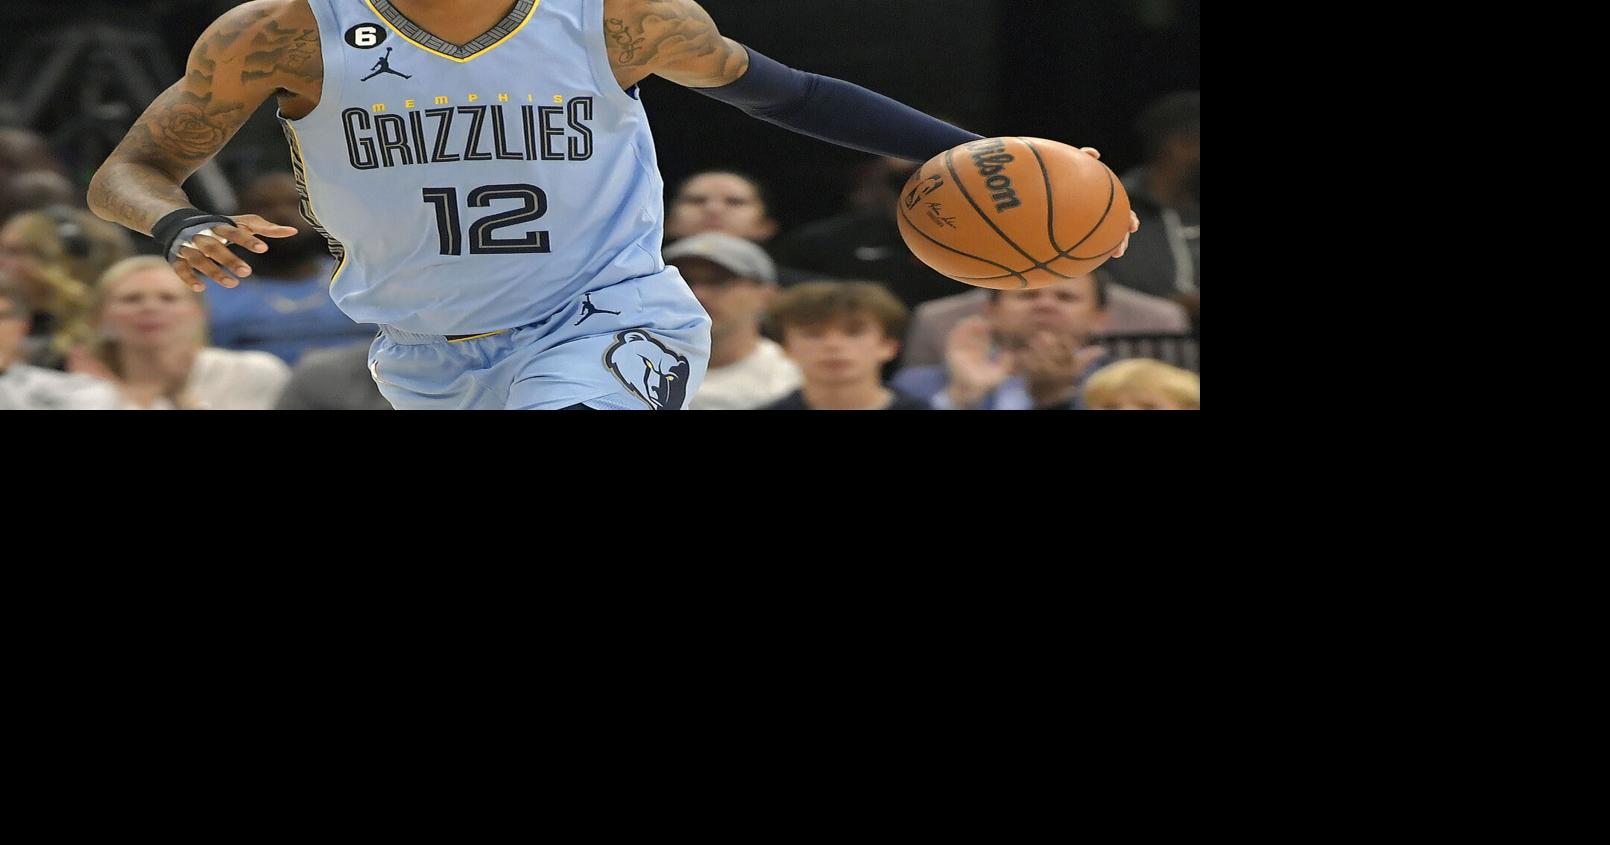 Paul Lukas on X: Comparison of Grizzlies' old and new white